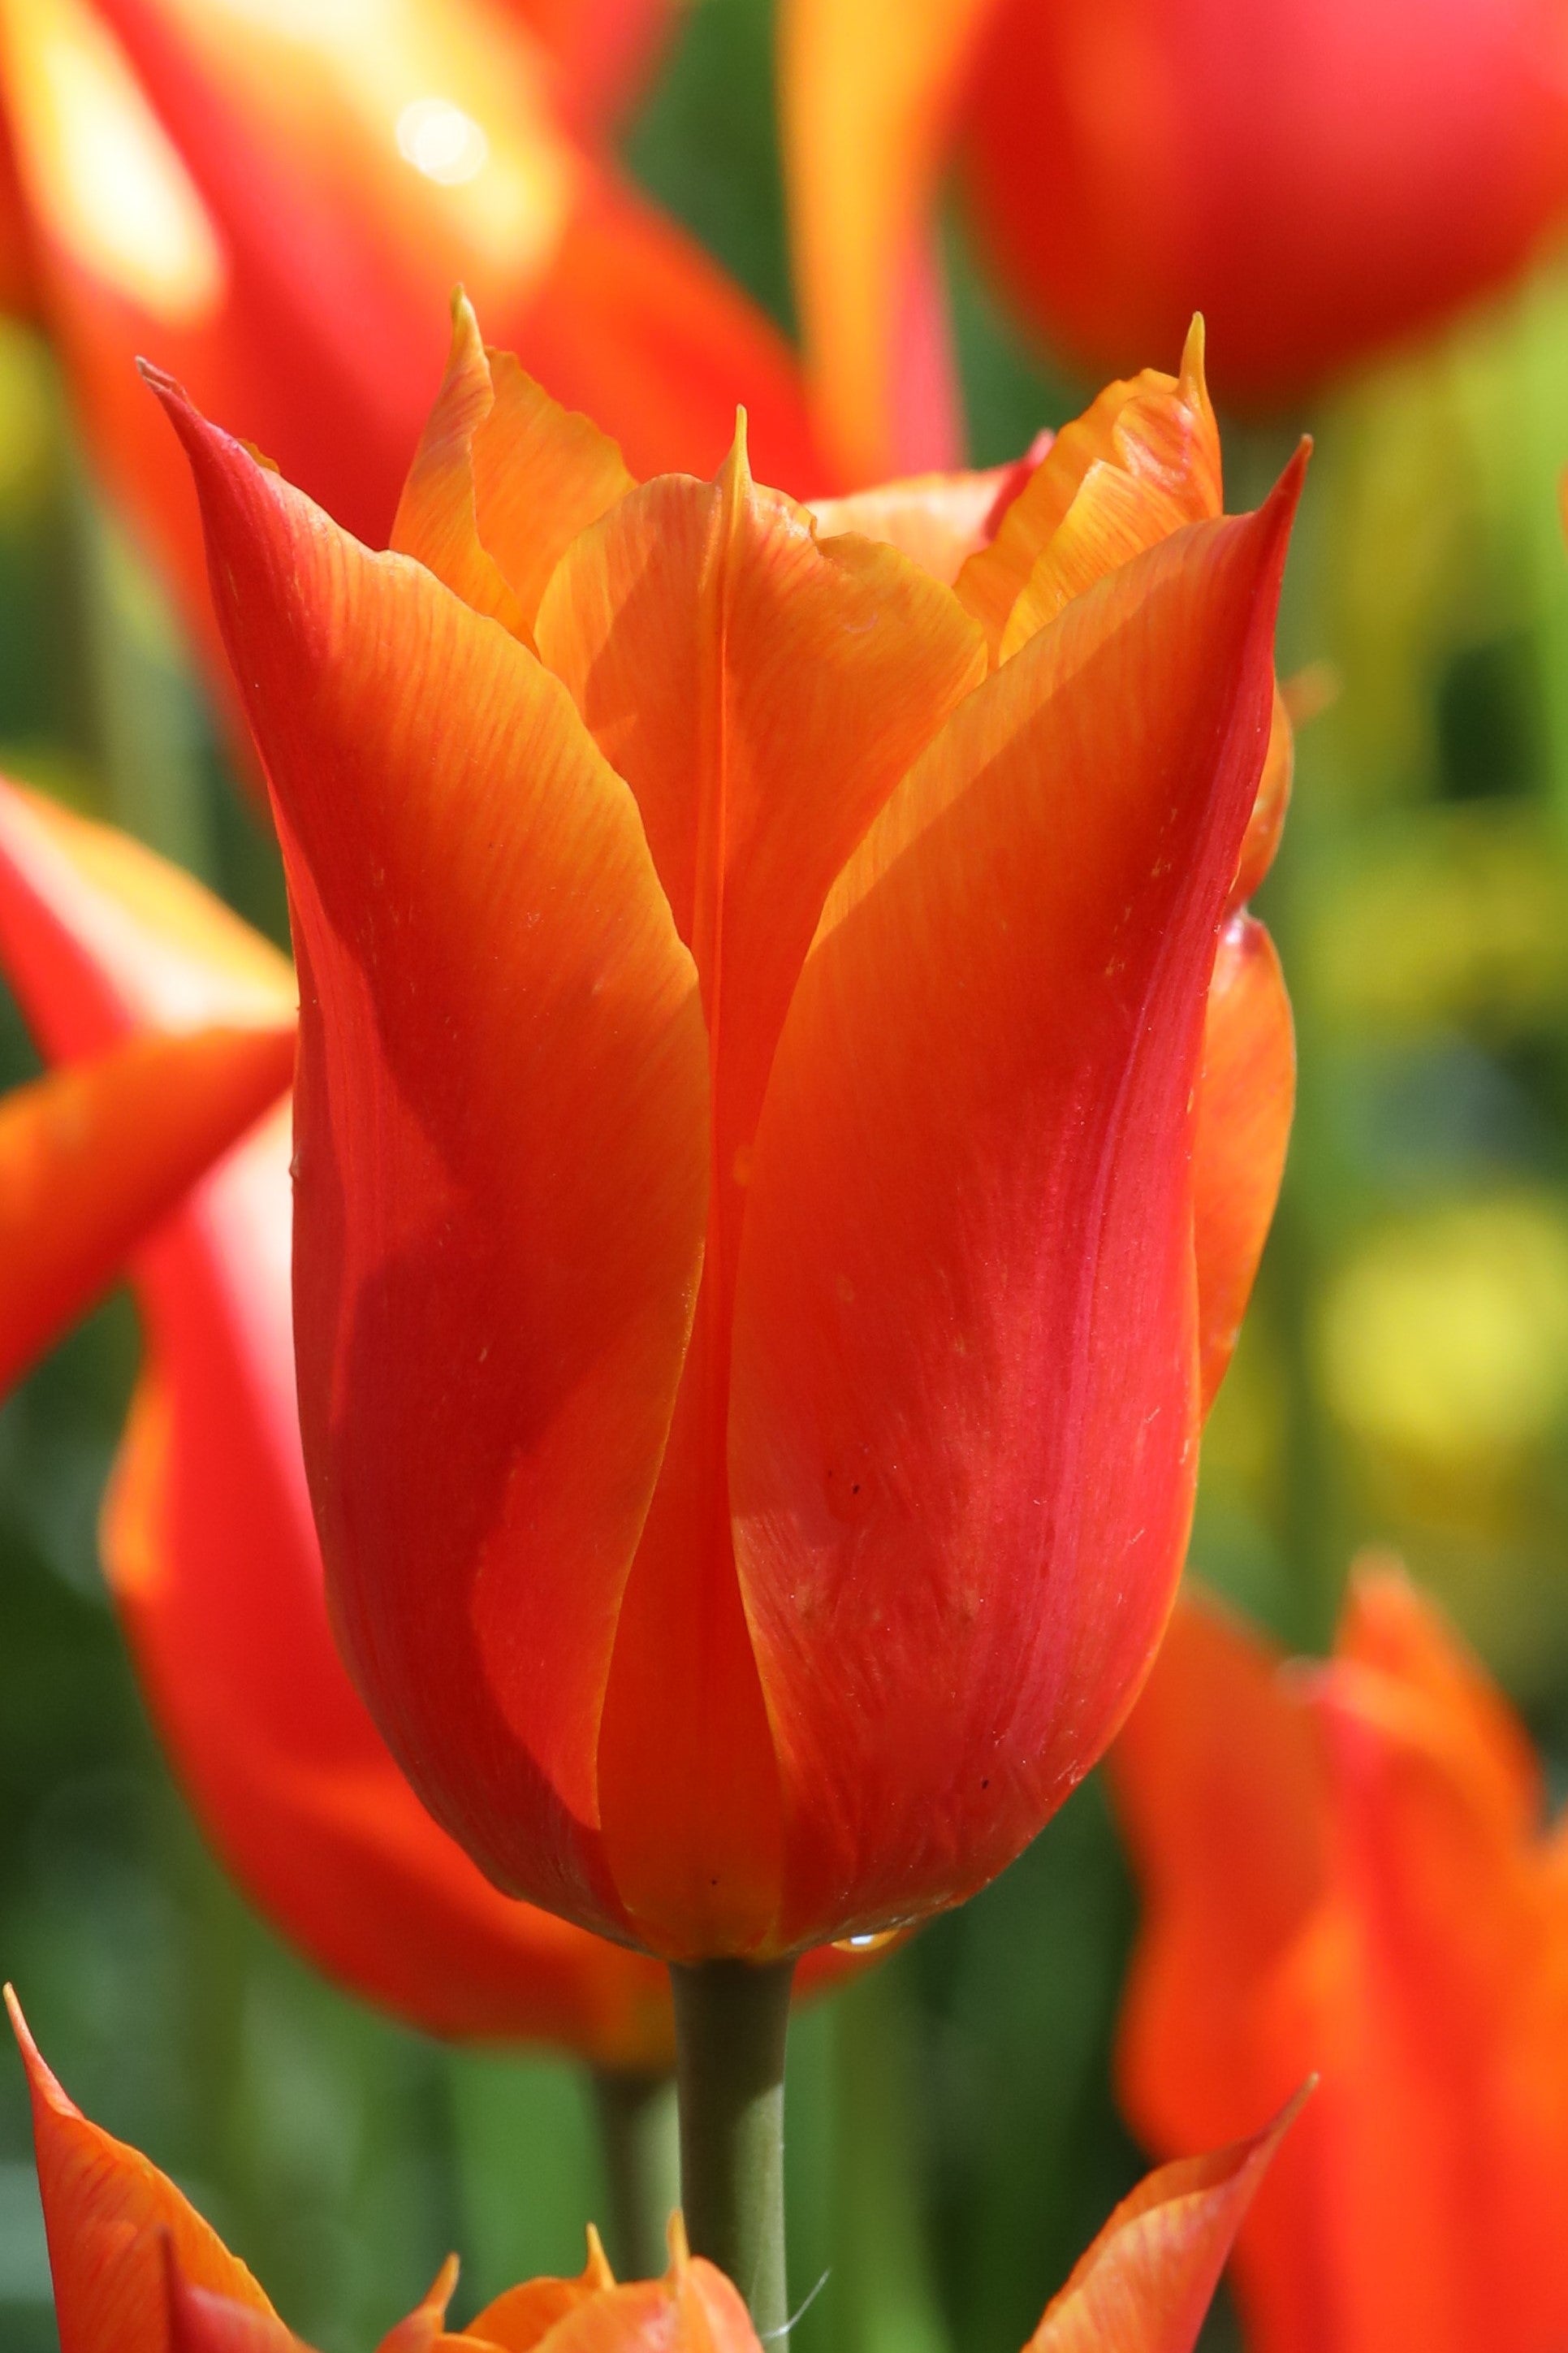 Lily flowering tulip Dutch Dancer: Elegant blossoms with a dancer's flair.